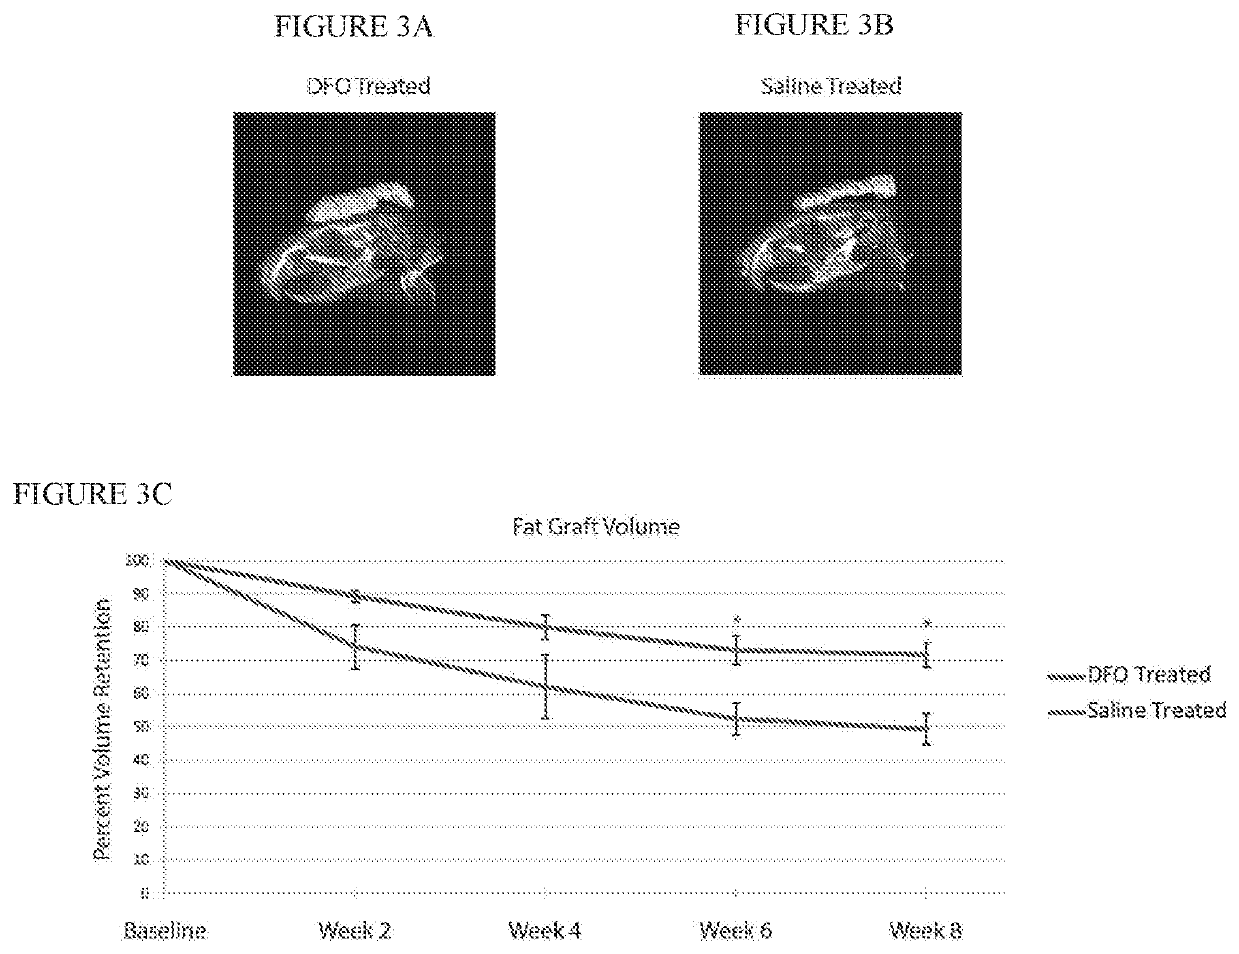 Conditioning irradiated tissue for increasing vascularity